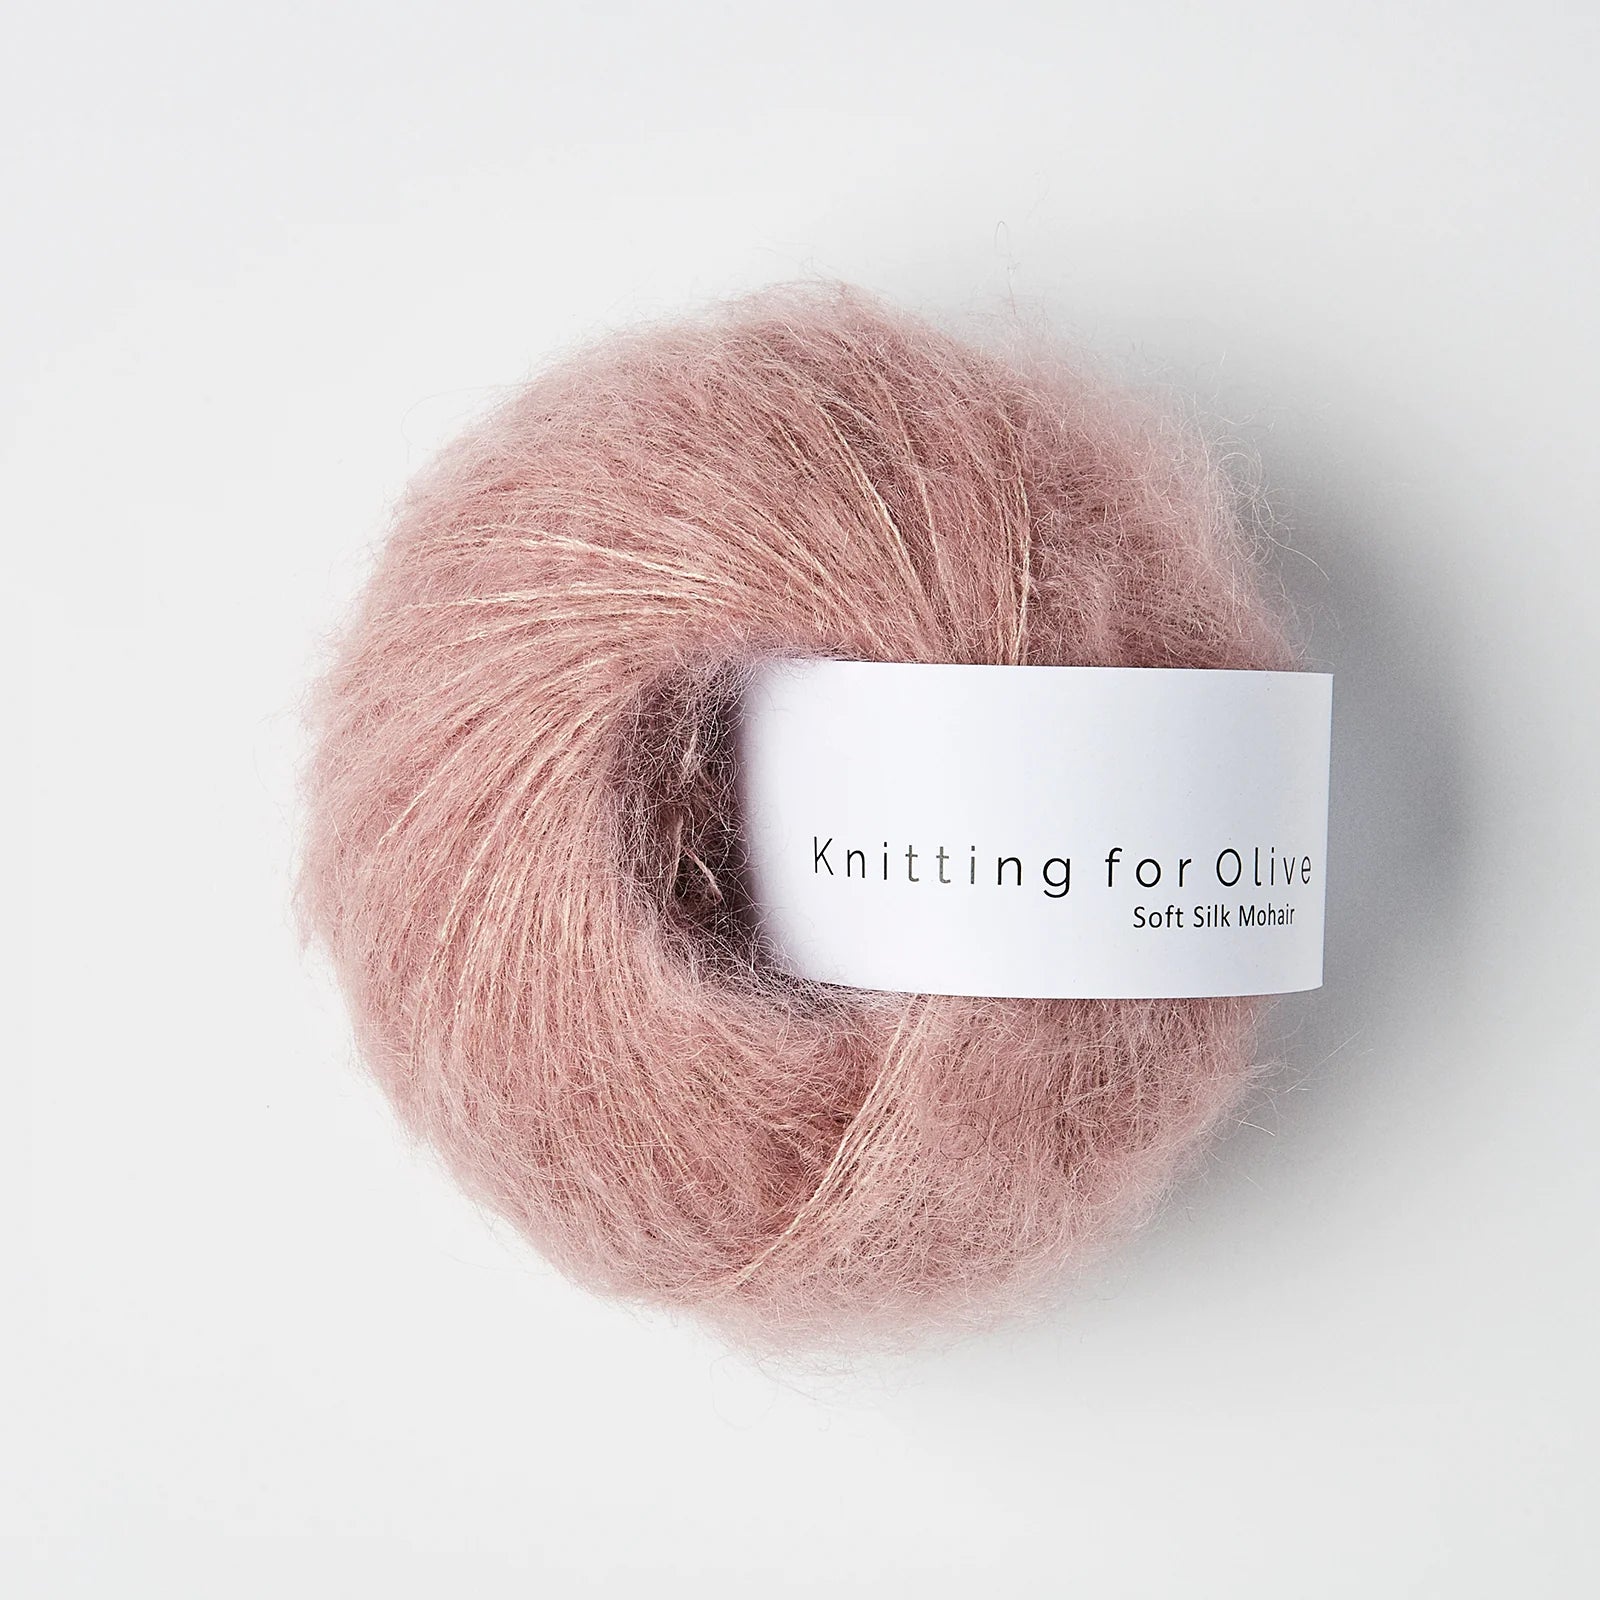 Knitting for Olive Soft Silk Mohair - Knitting for Olive - Dusty Rose - The Little Yarn Store